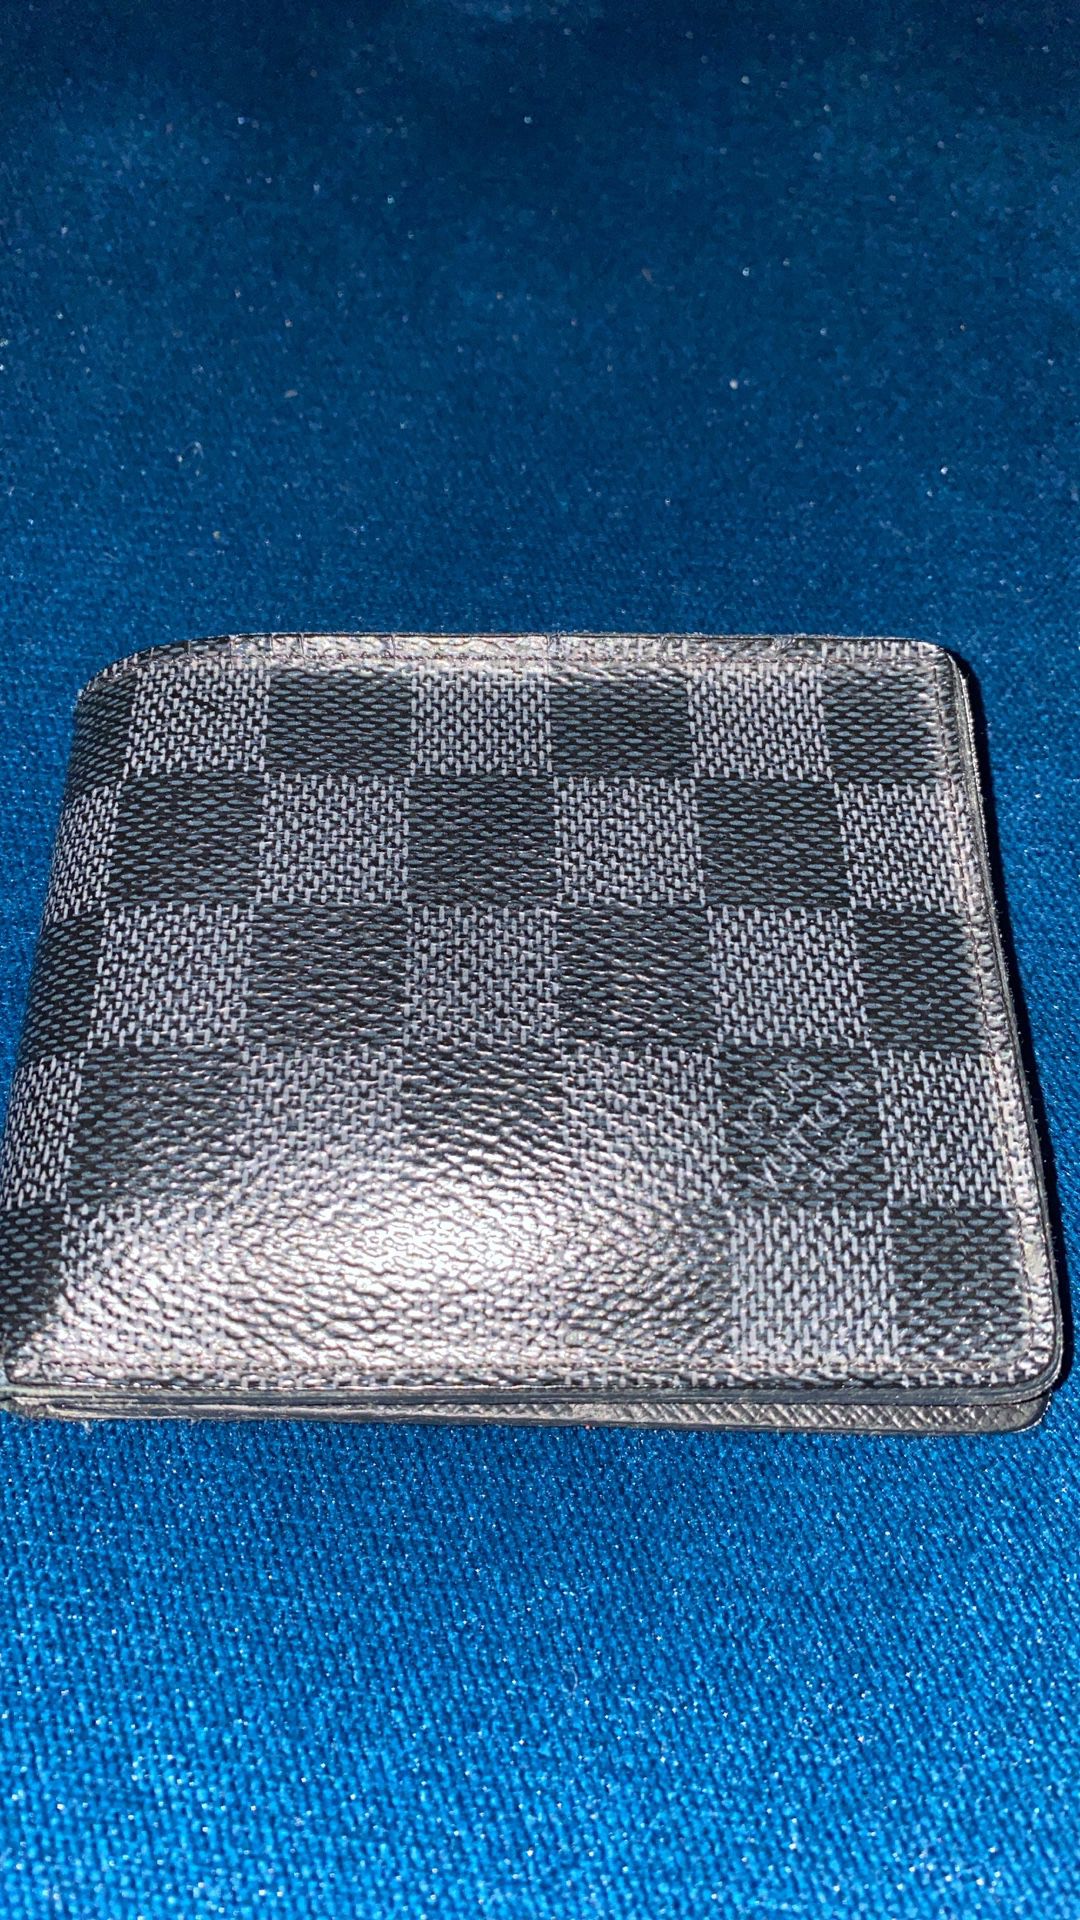 Louis Vuitton Wallets for sale in San Diego, California